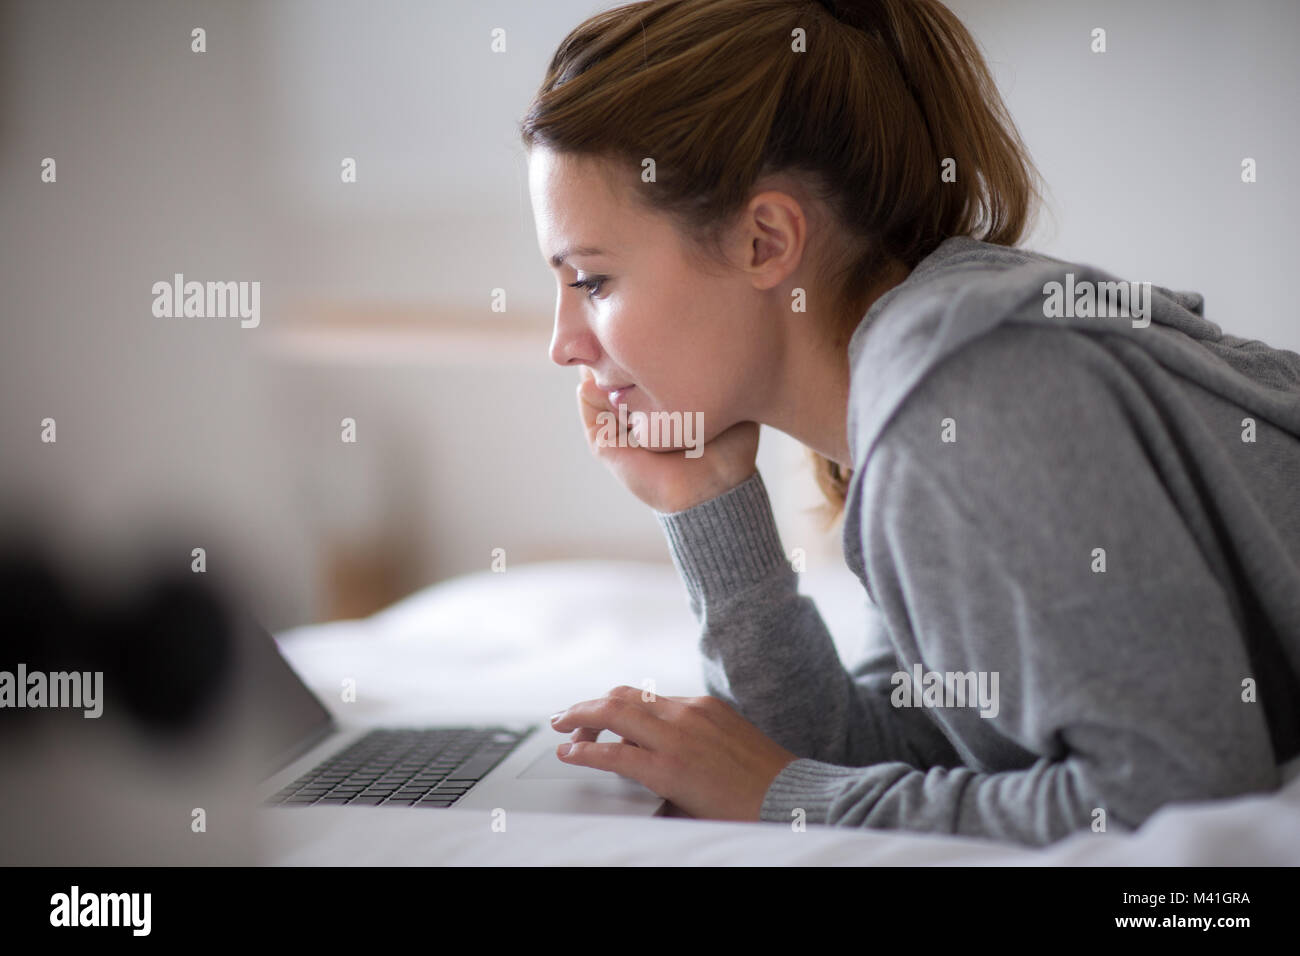 Young adult female using a laptop in bed Stock Photo